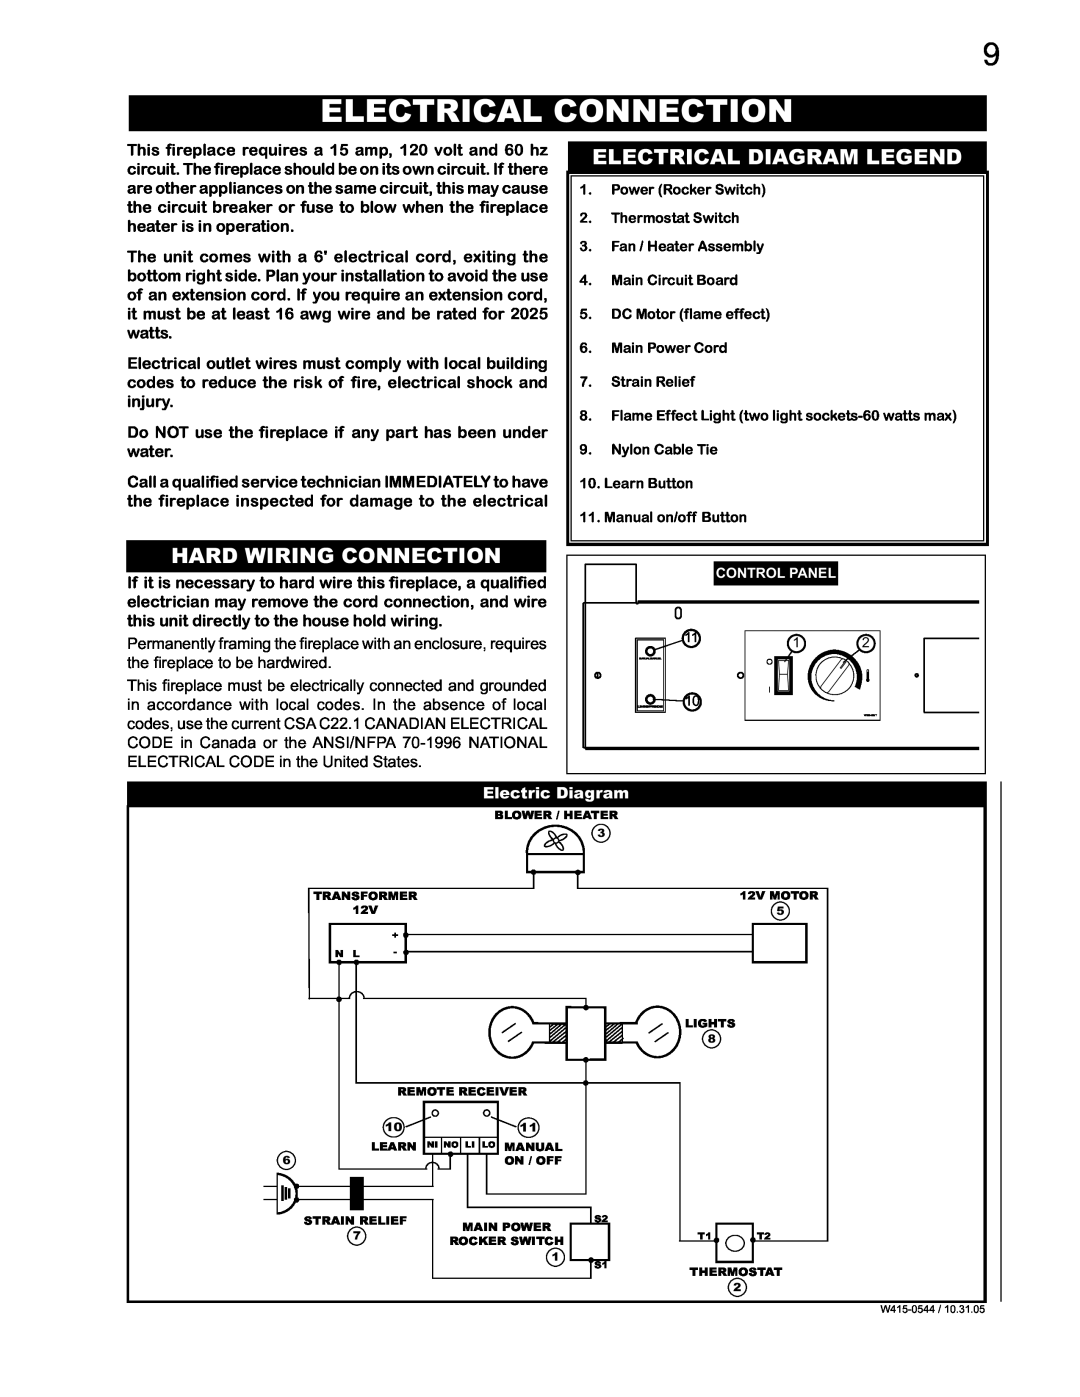 Napoleon Fireplaces EF36H manual Electrical Connection, Electrical Diagram Legend, Hard Wiring Connection, Electric Diagram 